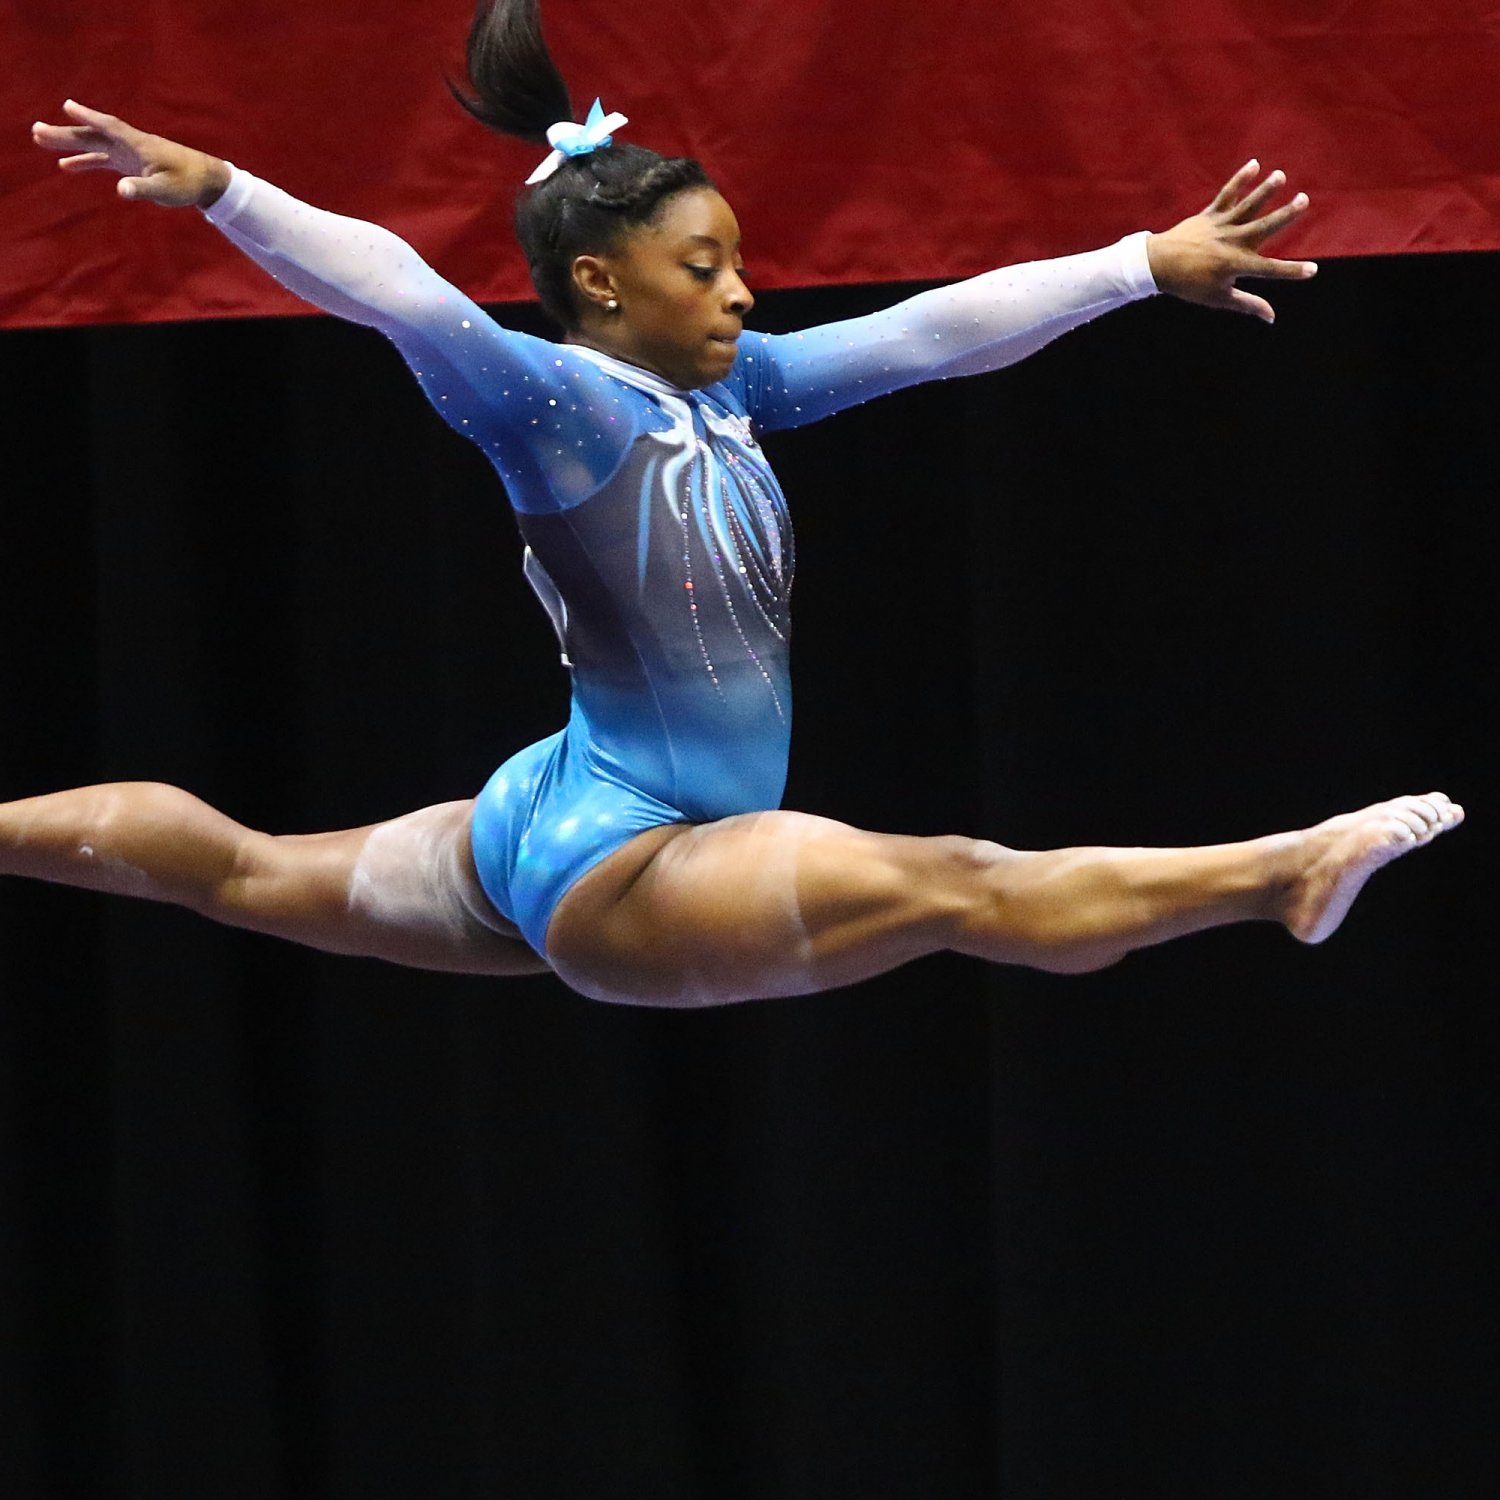 Women's Gymnastics 2016 Olympic Trials Friday Live Results and